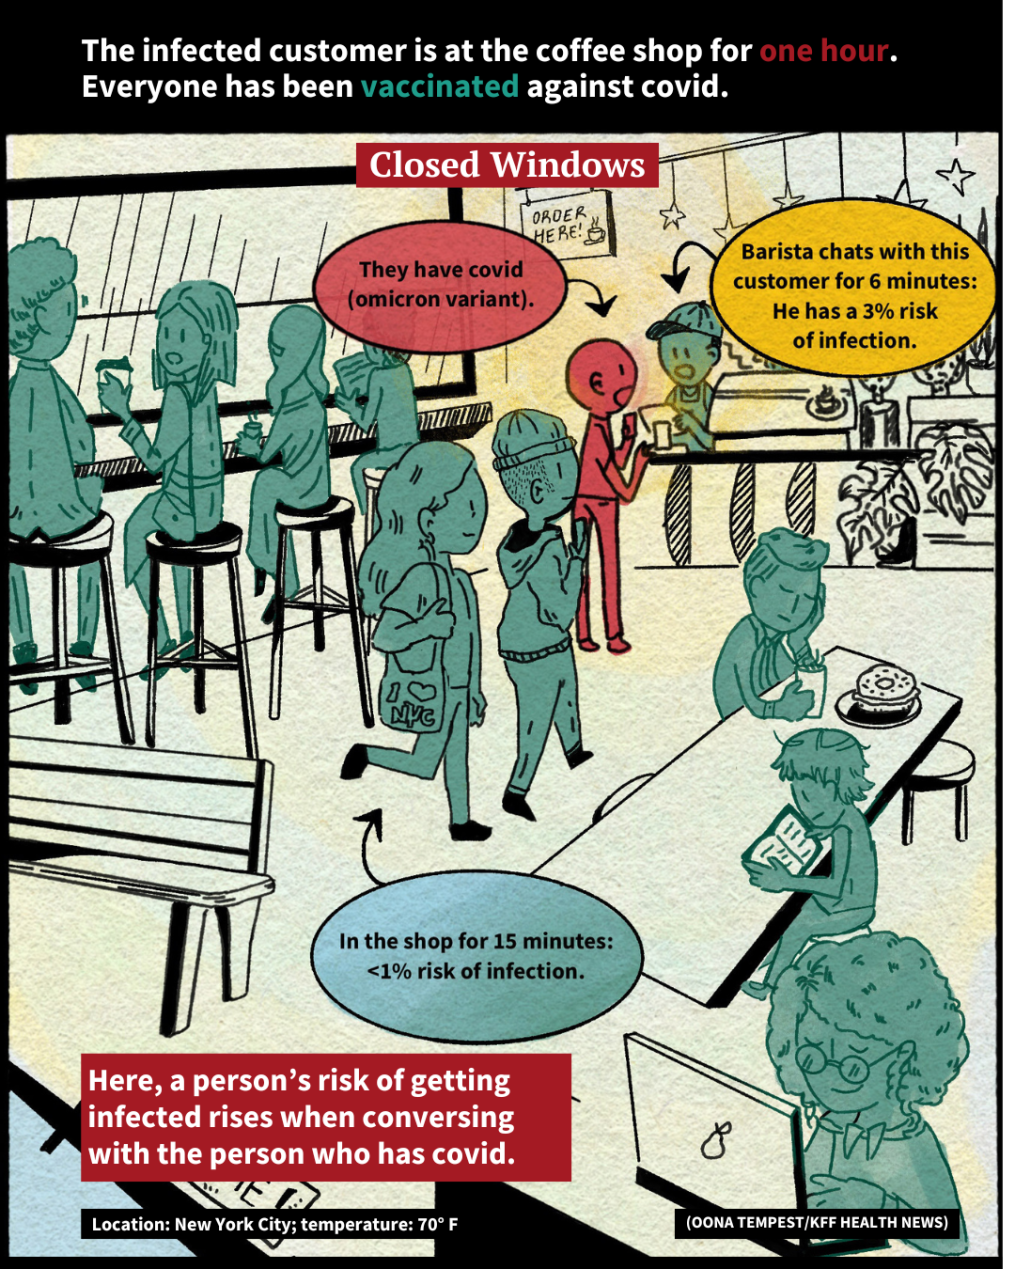 A digital, comic-style illustration shows a few scenarios at a small New York City coffee shop on a 70-degree Fahrenheit day. The first two panels are labeled “Closed Windows.” Everyone in the coffee shop has been vaccinated against covid-19 with mRNA vaccines. Twelve people are inside. No one is masked. The windows are closed. A person infected with the SARS-CoV-2 omicron variant will remain at the shop for one hour. In the first panel, the person with covid places an order, talking with the barista for 6 minutes before they settle down on a bench. This leaves the barista with a 3% risk of infection. Another customer in line for coffee is inside the shop for 15 minutes. They have a less than 1% risk of infection. 